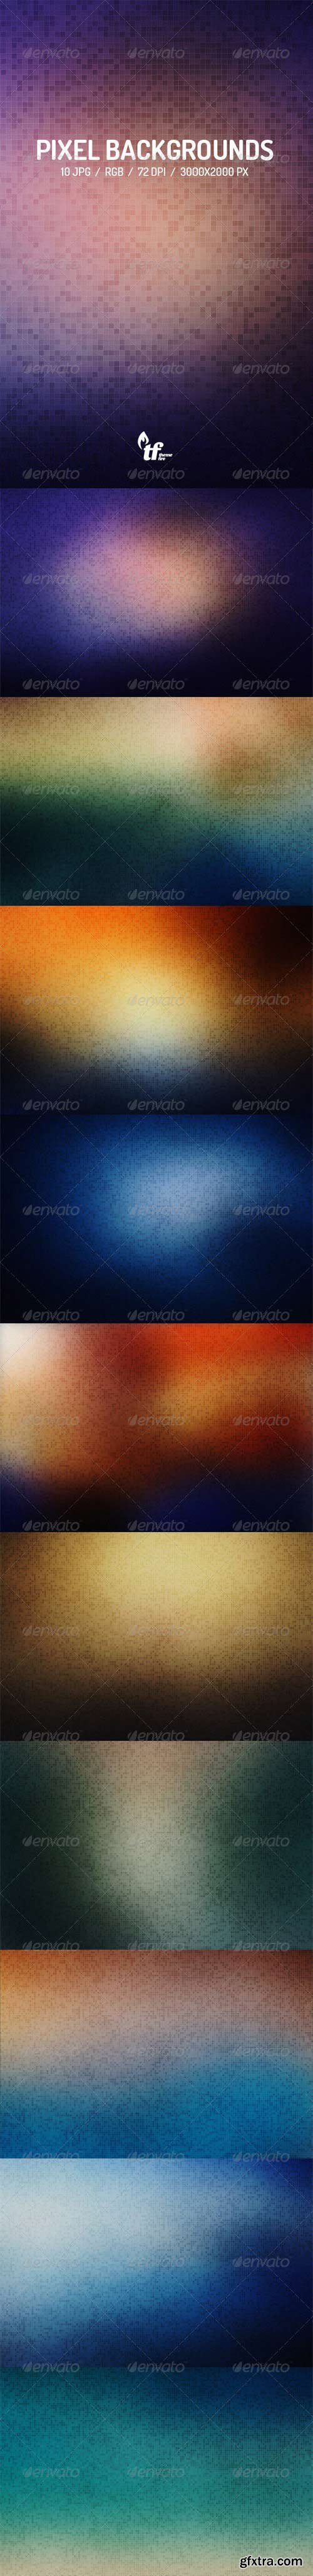 GraphicRiver - Pixel Backgrounds 7521864